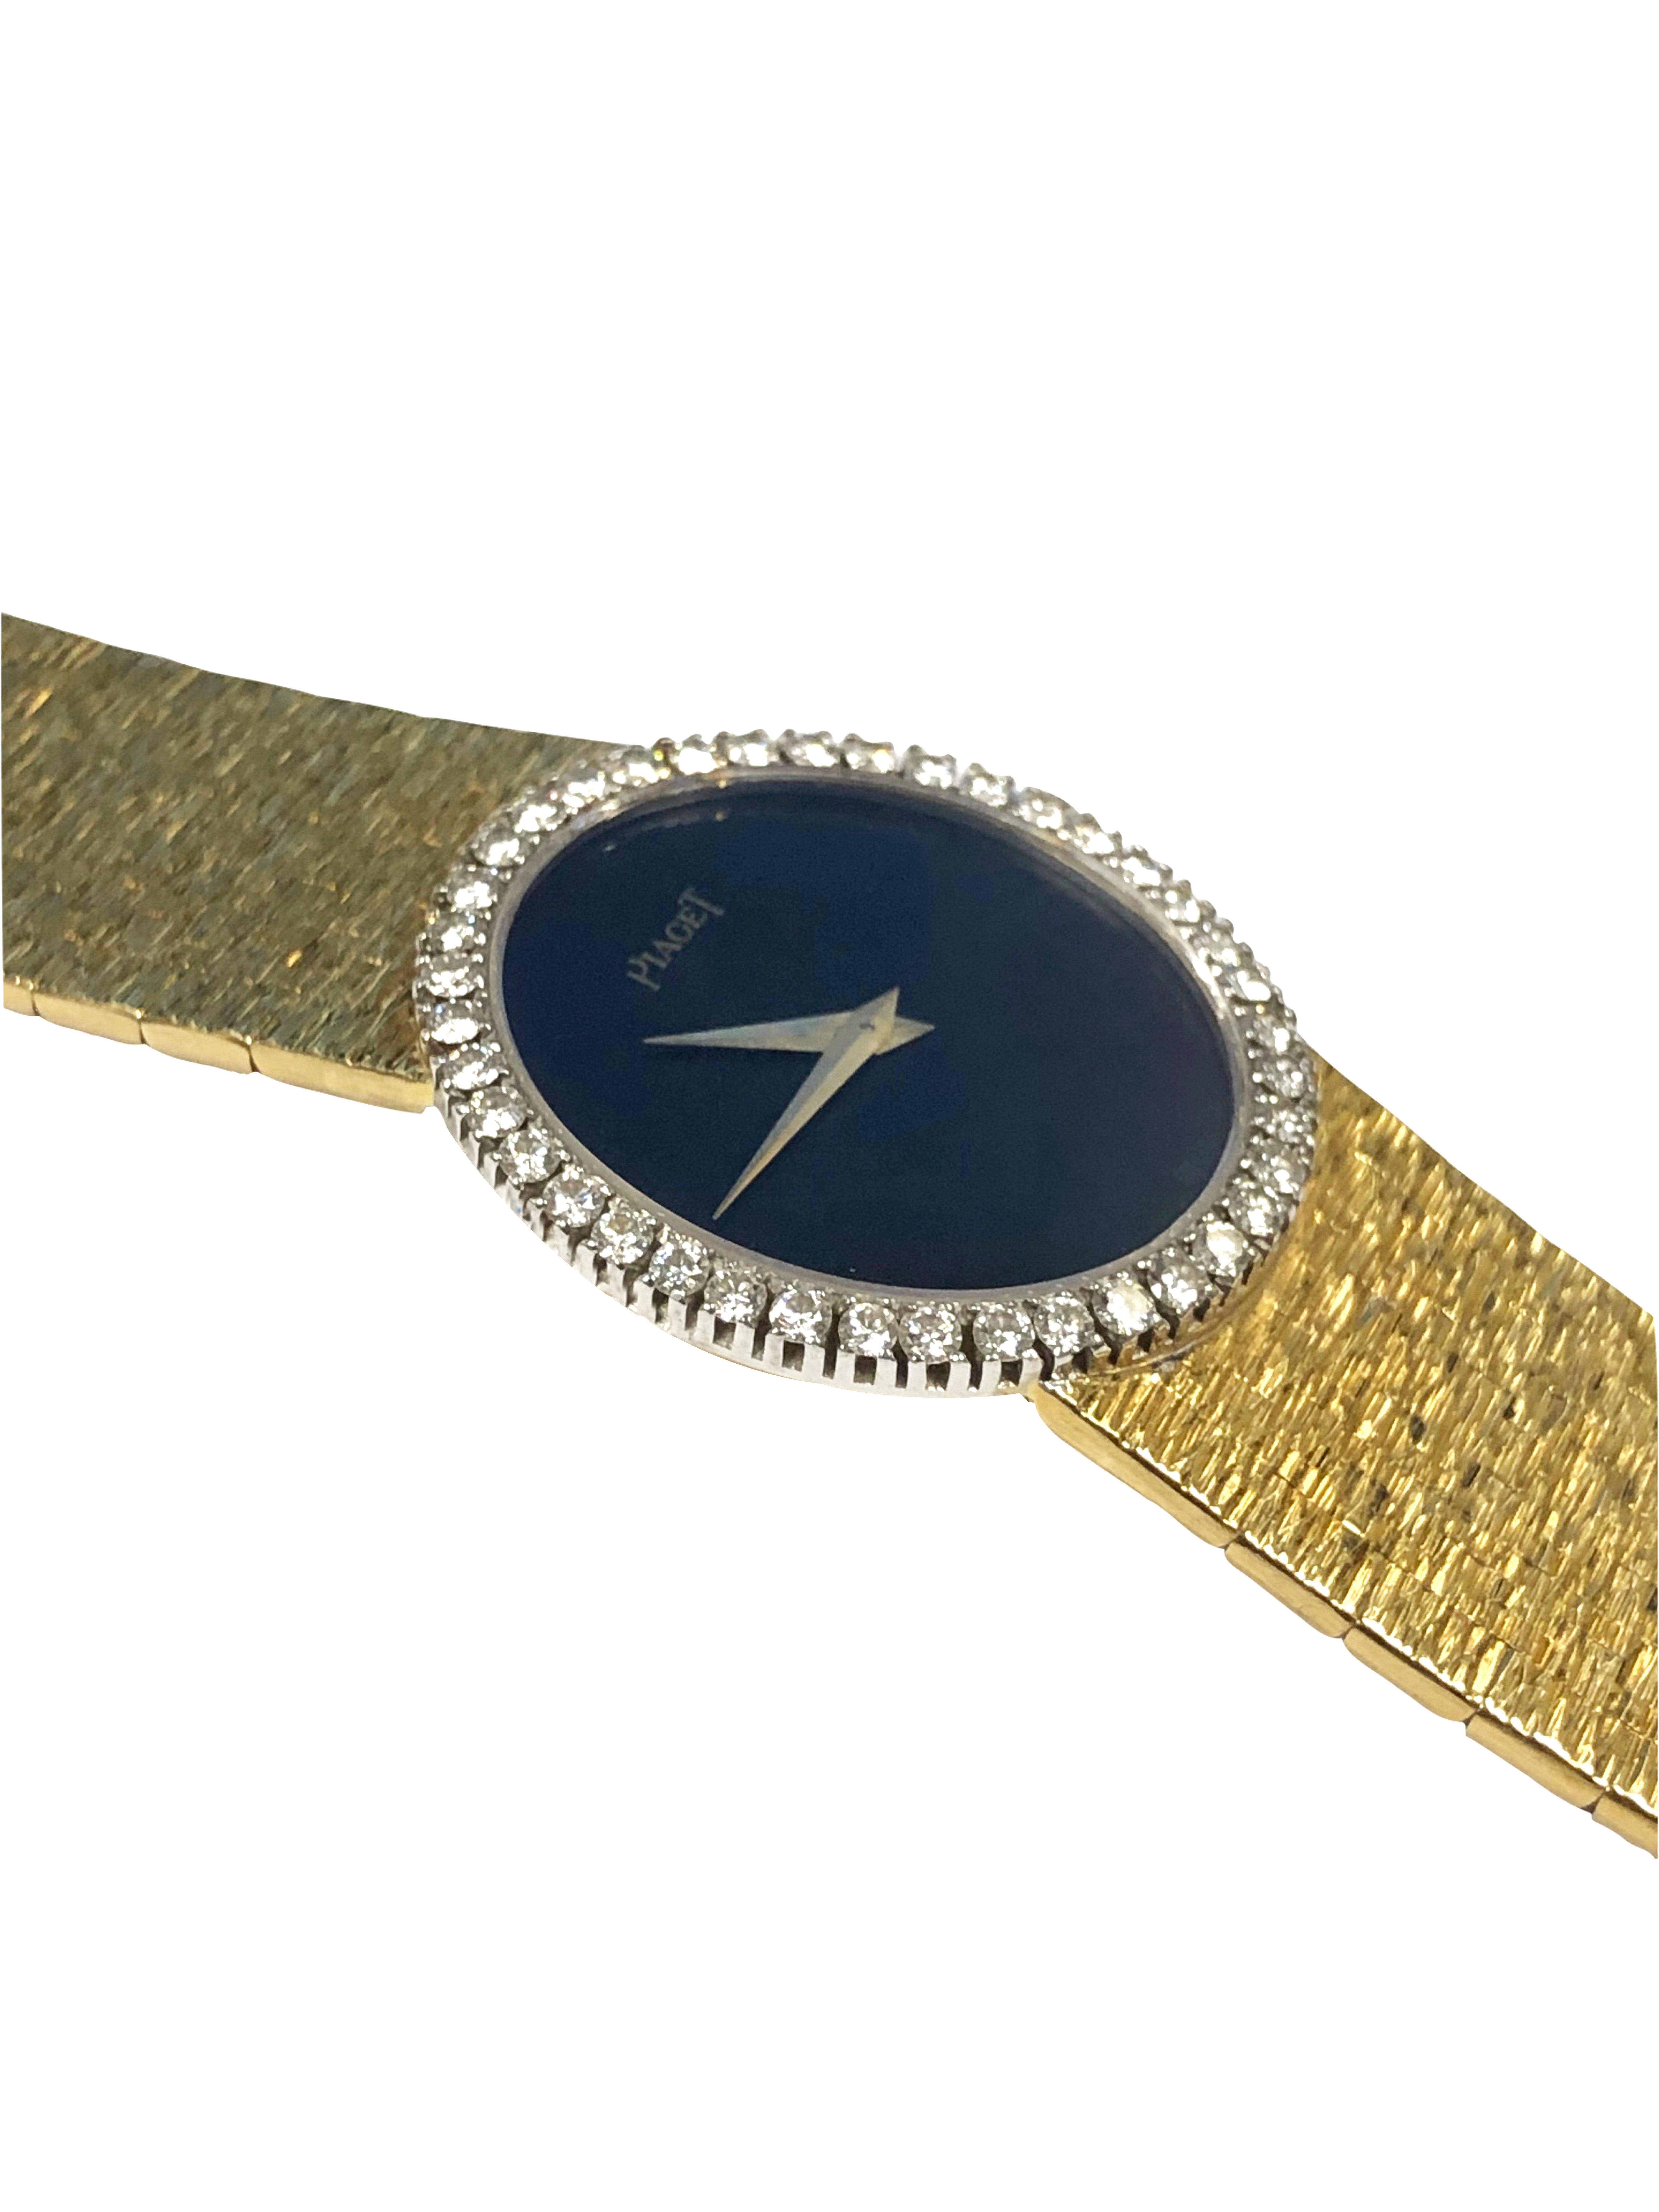 Round Cut Piaget Vintage Yellow Gold Diamonds and Onyx Dial Ladies Wrist Watch